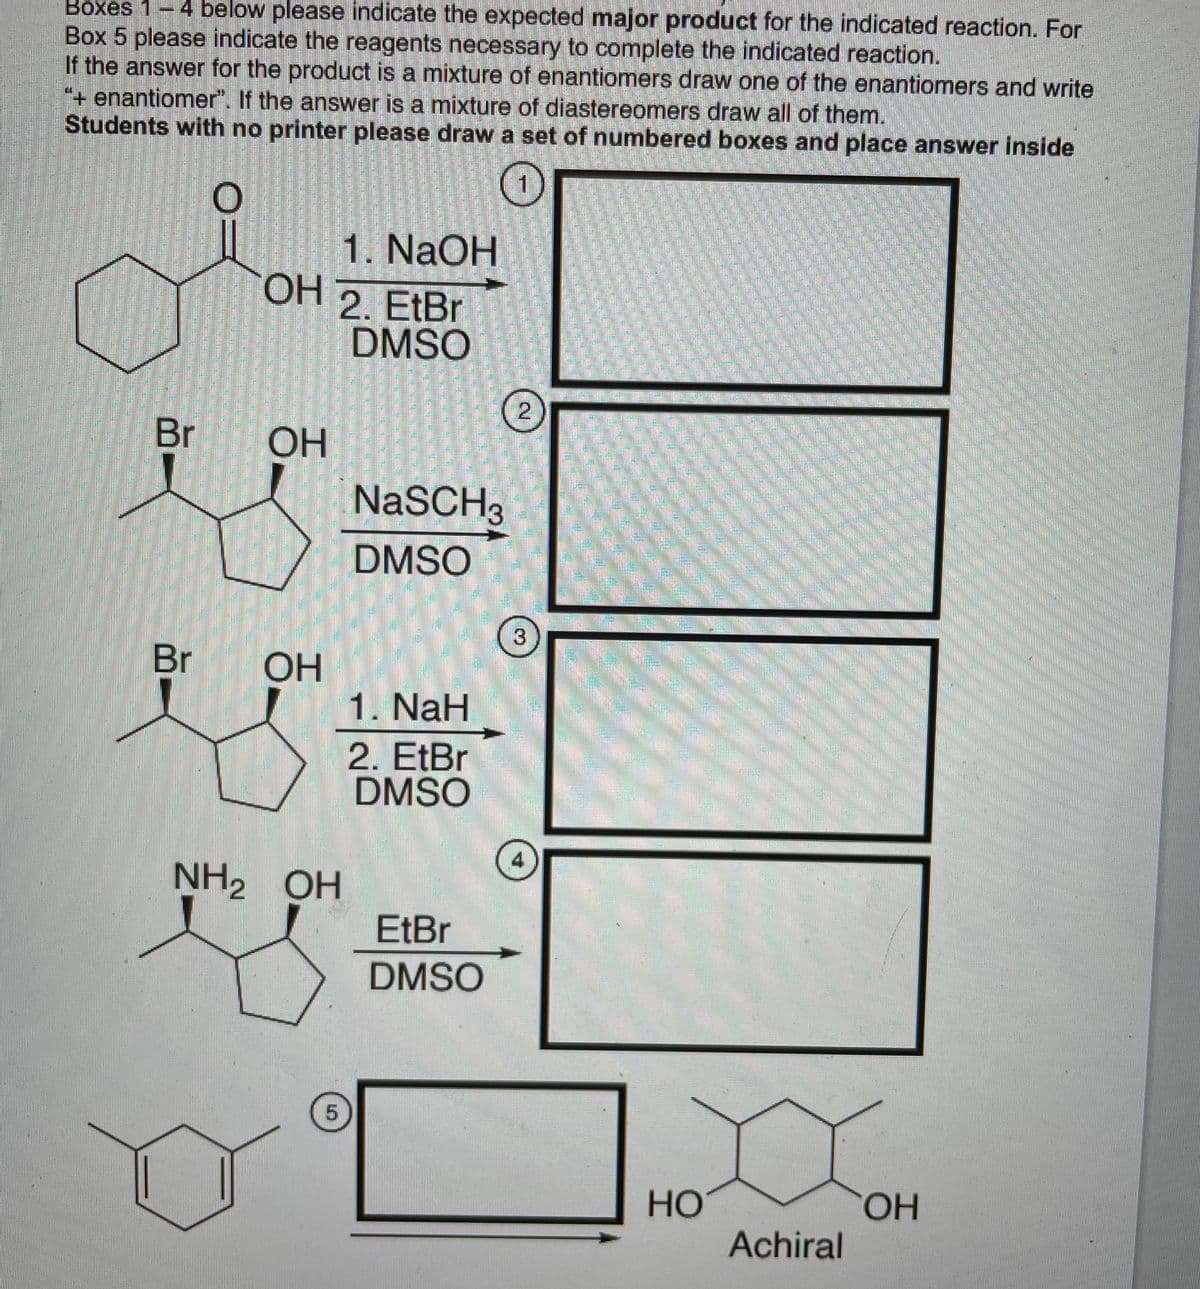 Boxes 1-4 below please indicate the expected major product for the indicated reaction. For
Box 5 please indicate the reagents necessary to complete the indicated reaction.
If the answer for the product is a mixture of enantiomers draw one of the enantiomers and write
"+ enantiomer". If the answer is a mixture of diastereomers draw all of them.
Students with no printer please draw a set of numbered boxes and place answer inside
1. NaOH
OH 2. EtBr
DMSO
Br
OH
NaSCH3
DMSO
3
Br
ОН
1. NaH
2. EtBr
DMSO
4
NH2 OH
EtBr
DMSO
5.
HO.
HỌ
Achiral
